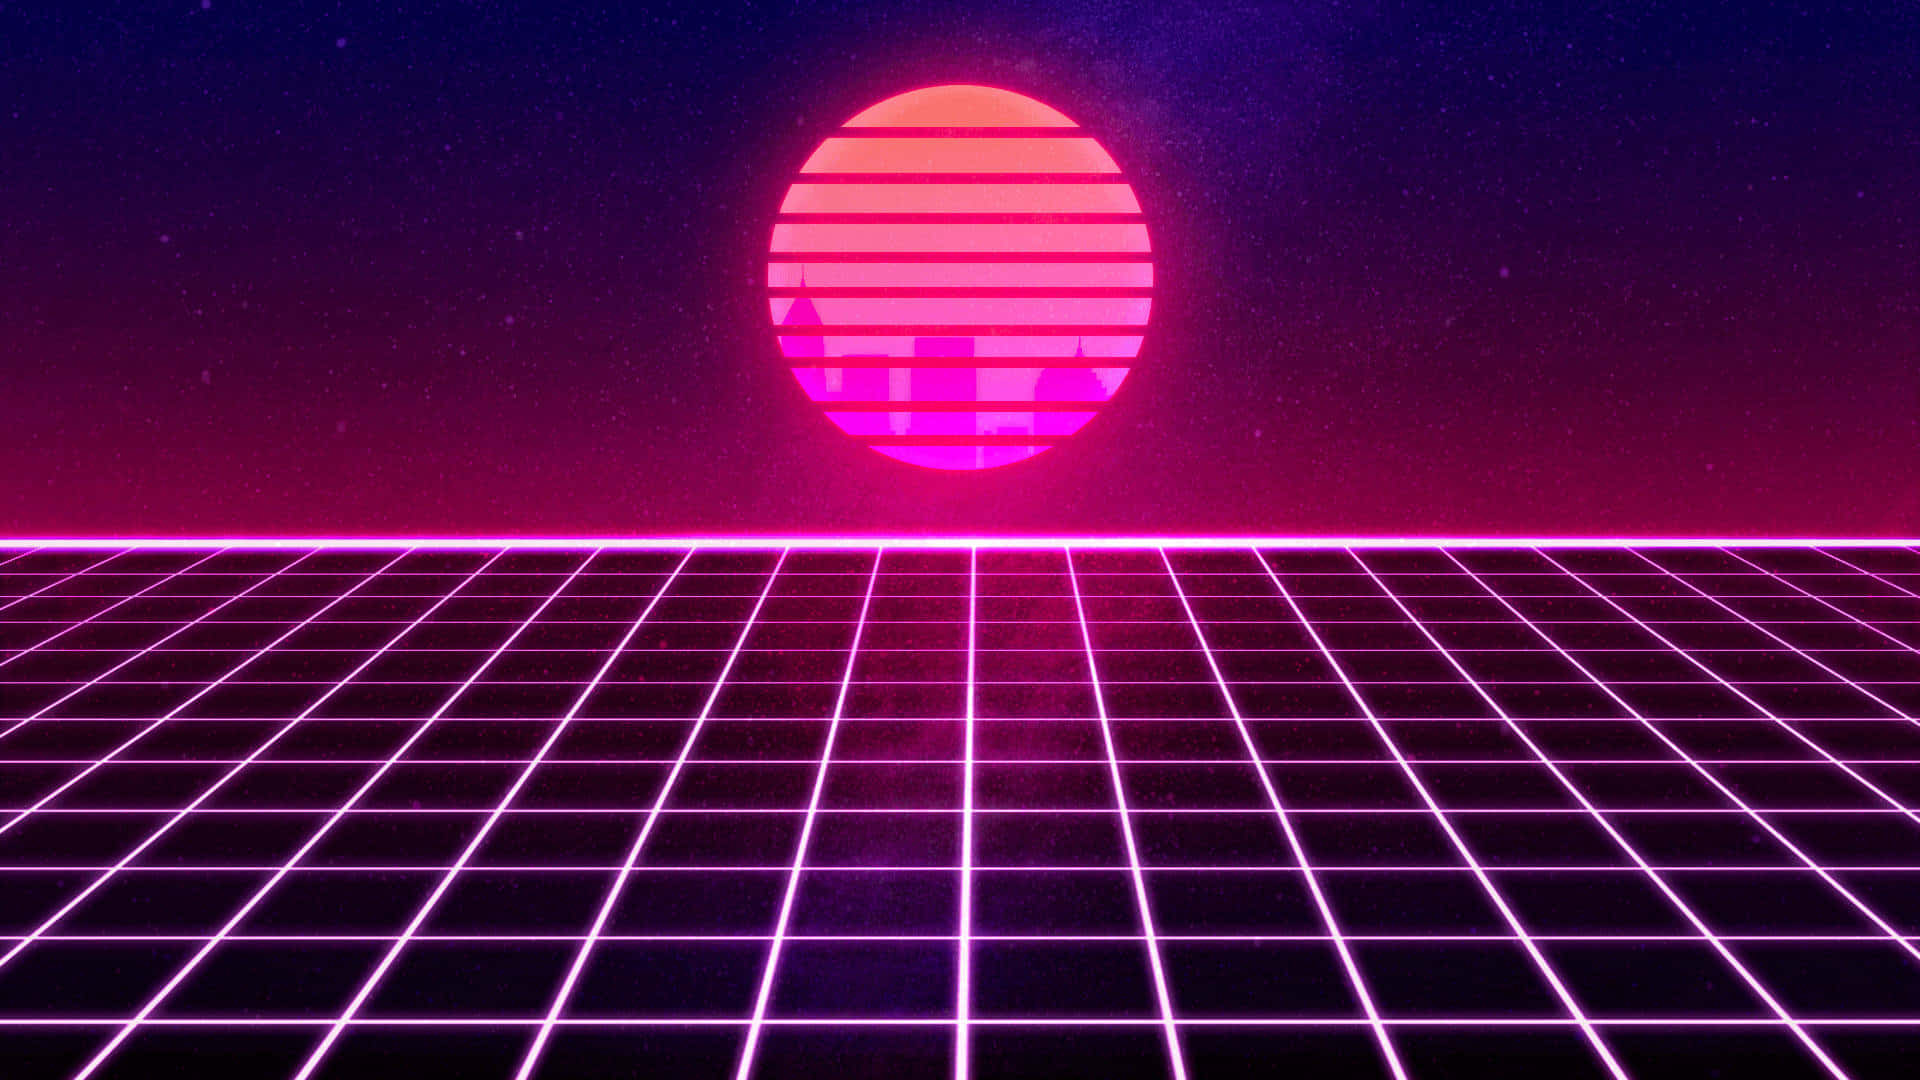 Step back in time to the 80s with this colorful retro background